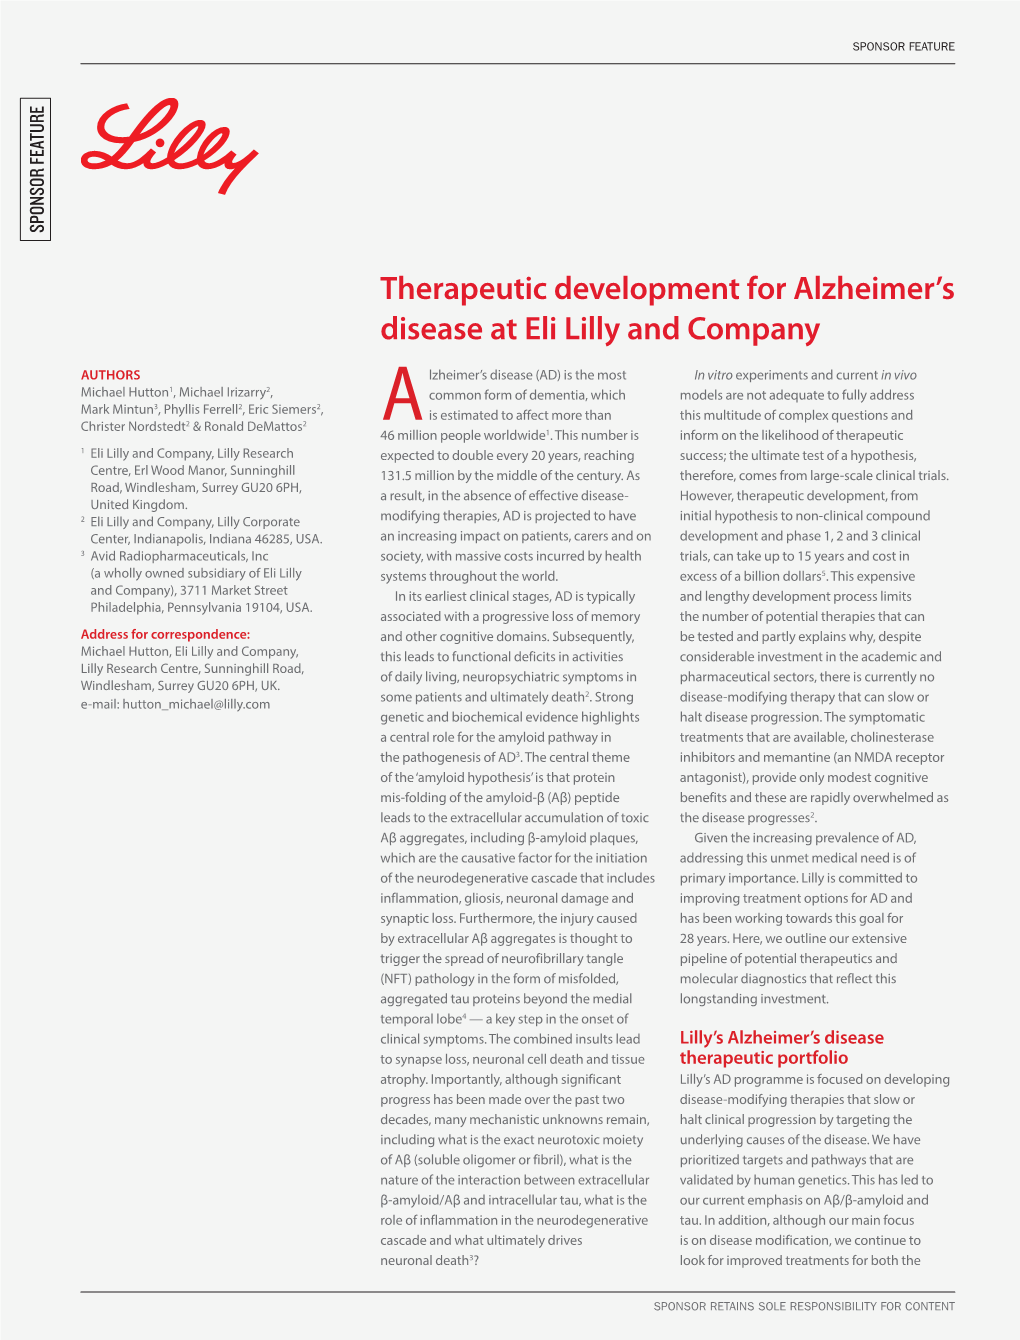 Therapeutic Development for Alzheimer's Disease at Eli Lilly And